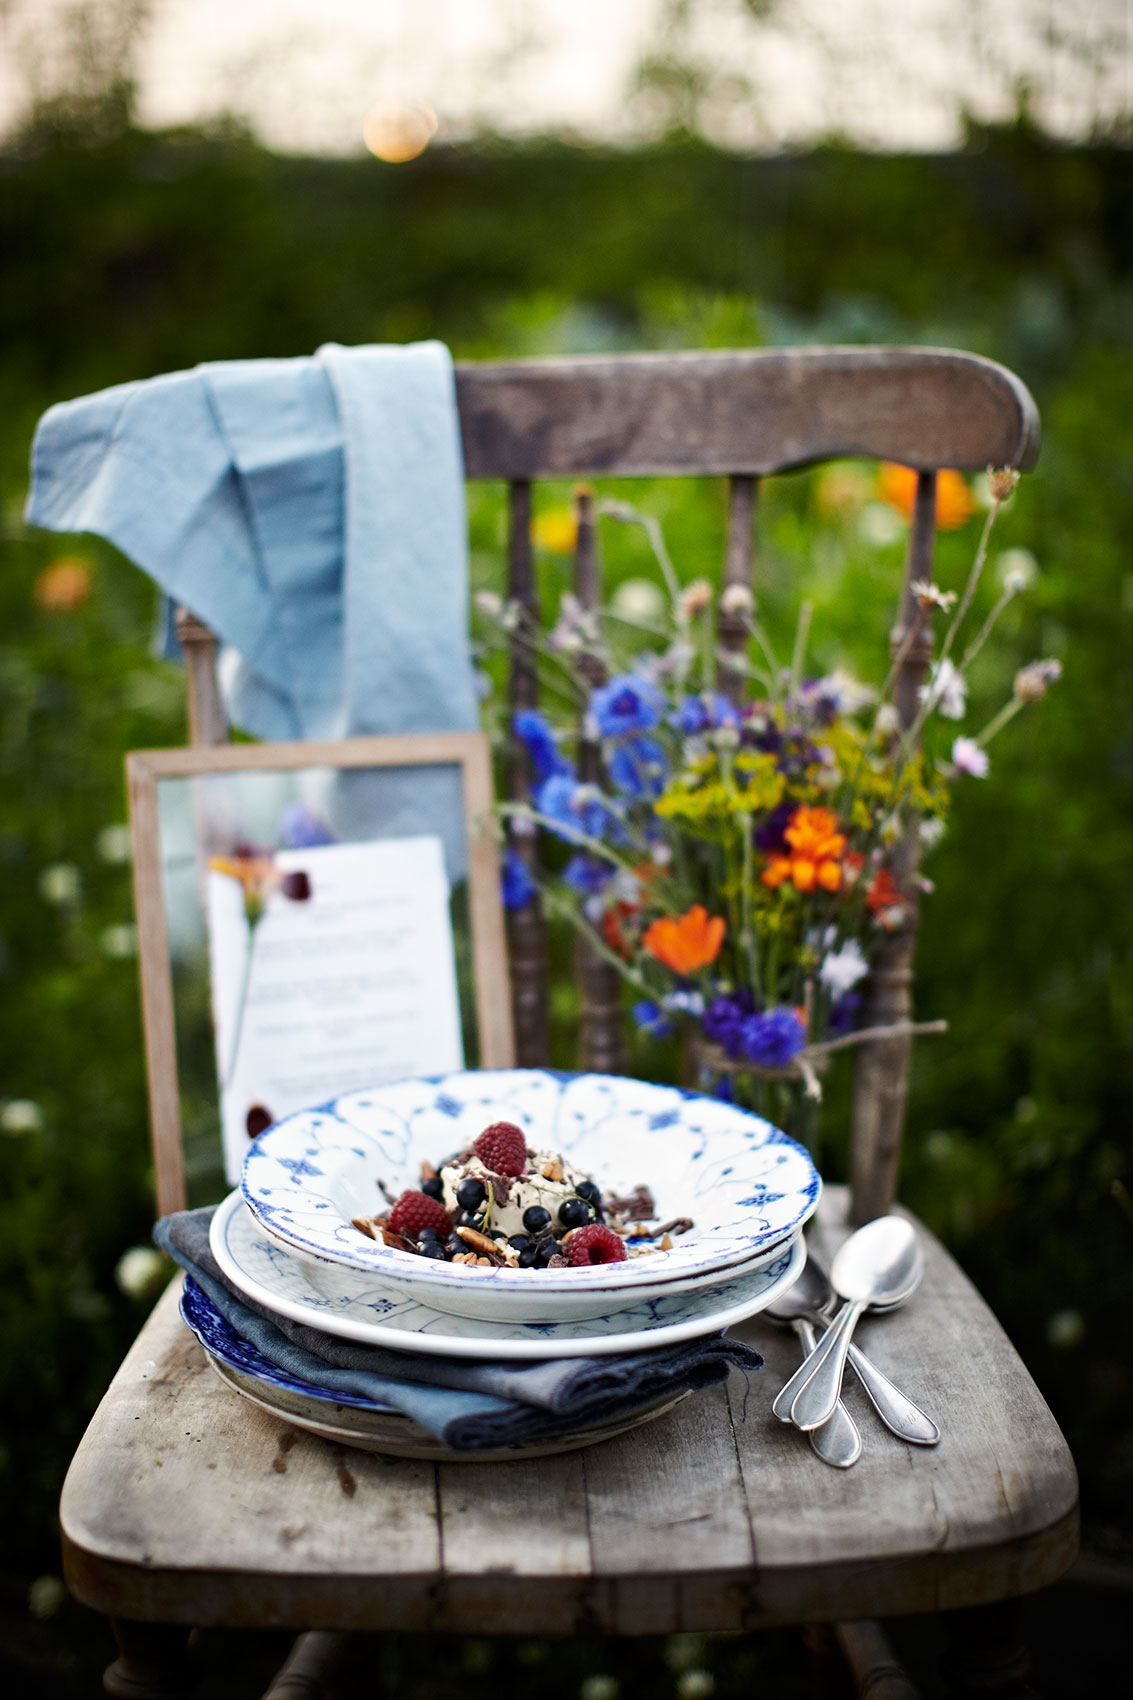 Stedsans in the Woods • Parfait with Fresh Raspberries & Blueberries on Wooden Chair • Lifestyle & Editorial Food Photography